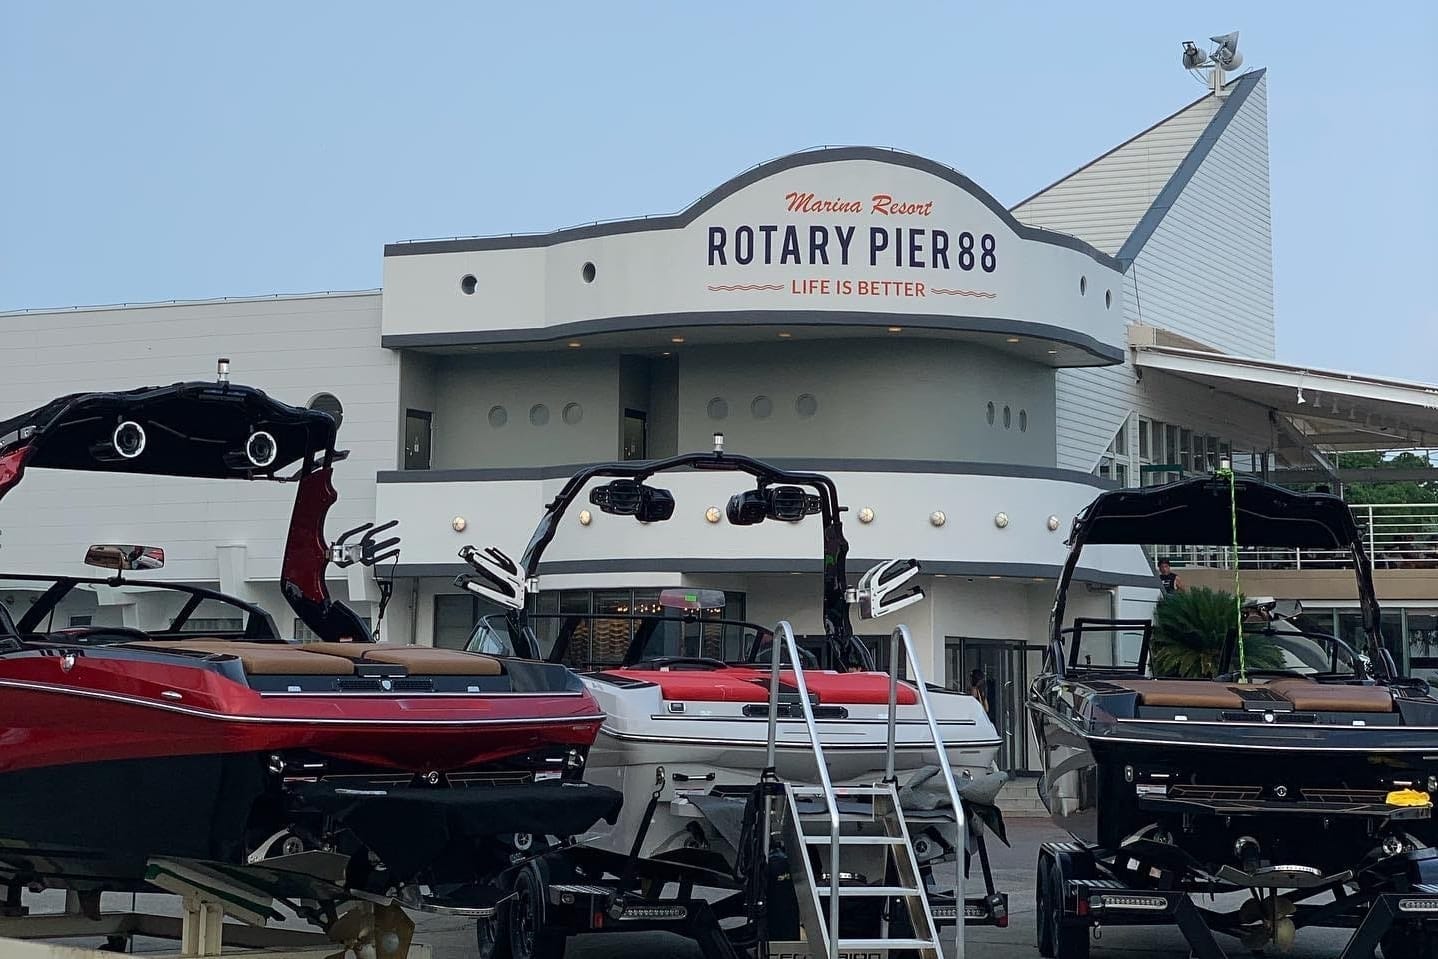 Front view of Rotary Pier 88 at Mansa Resort, showcasing several docked boats and the entrance to the pier building with signage 